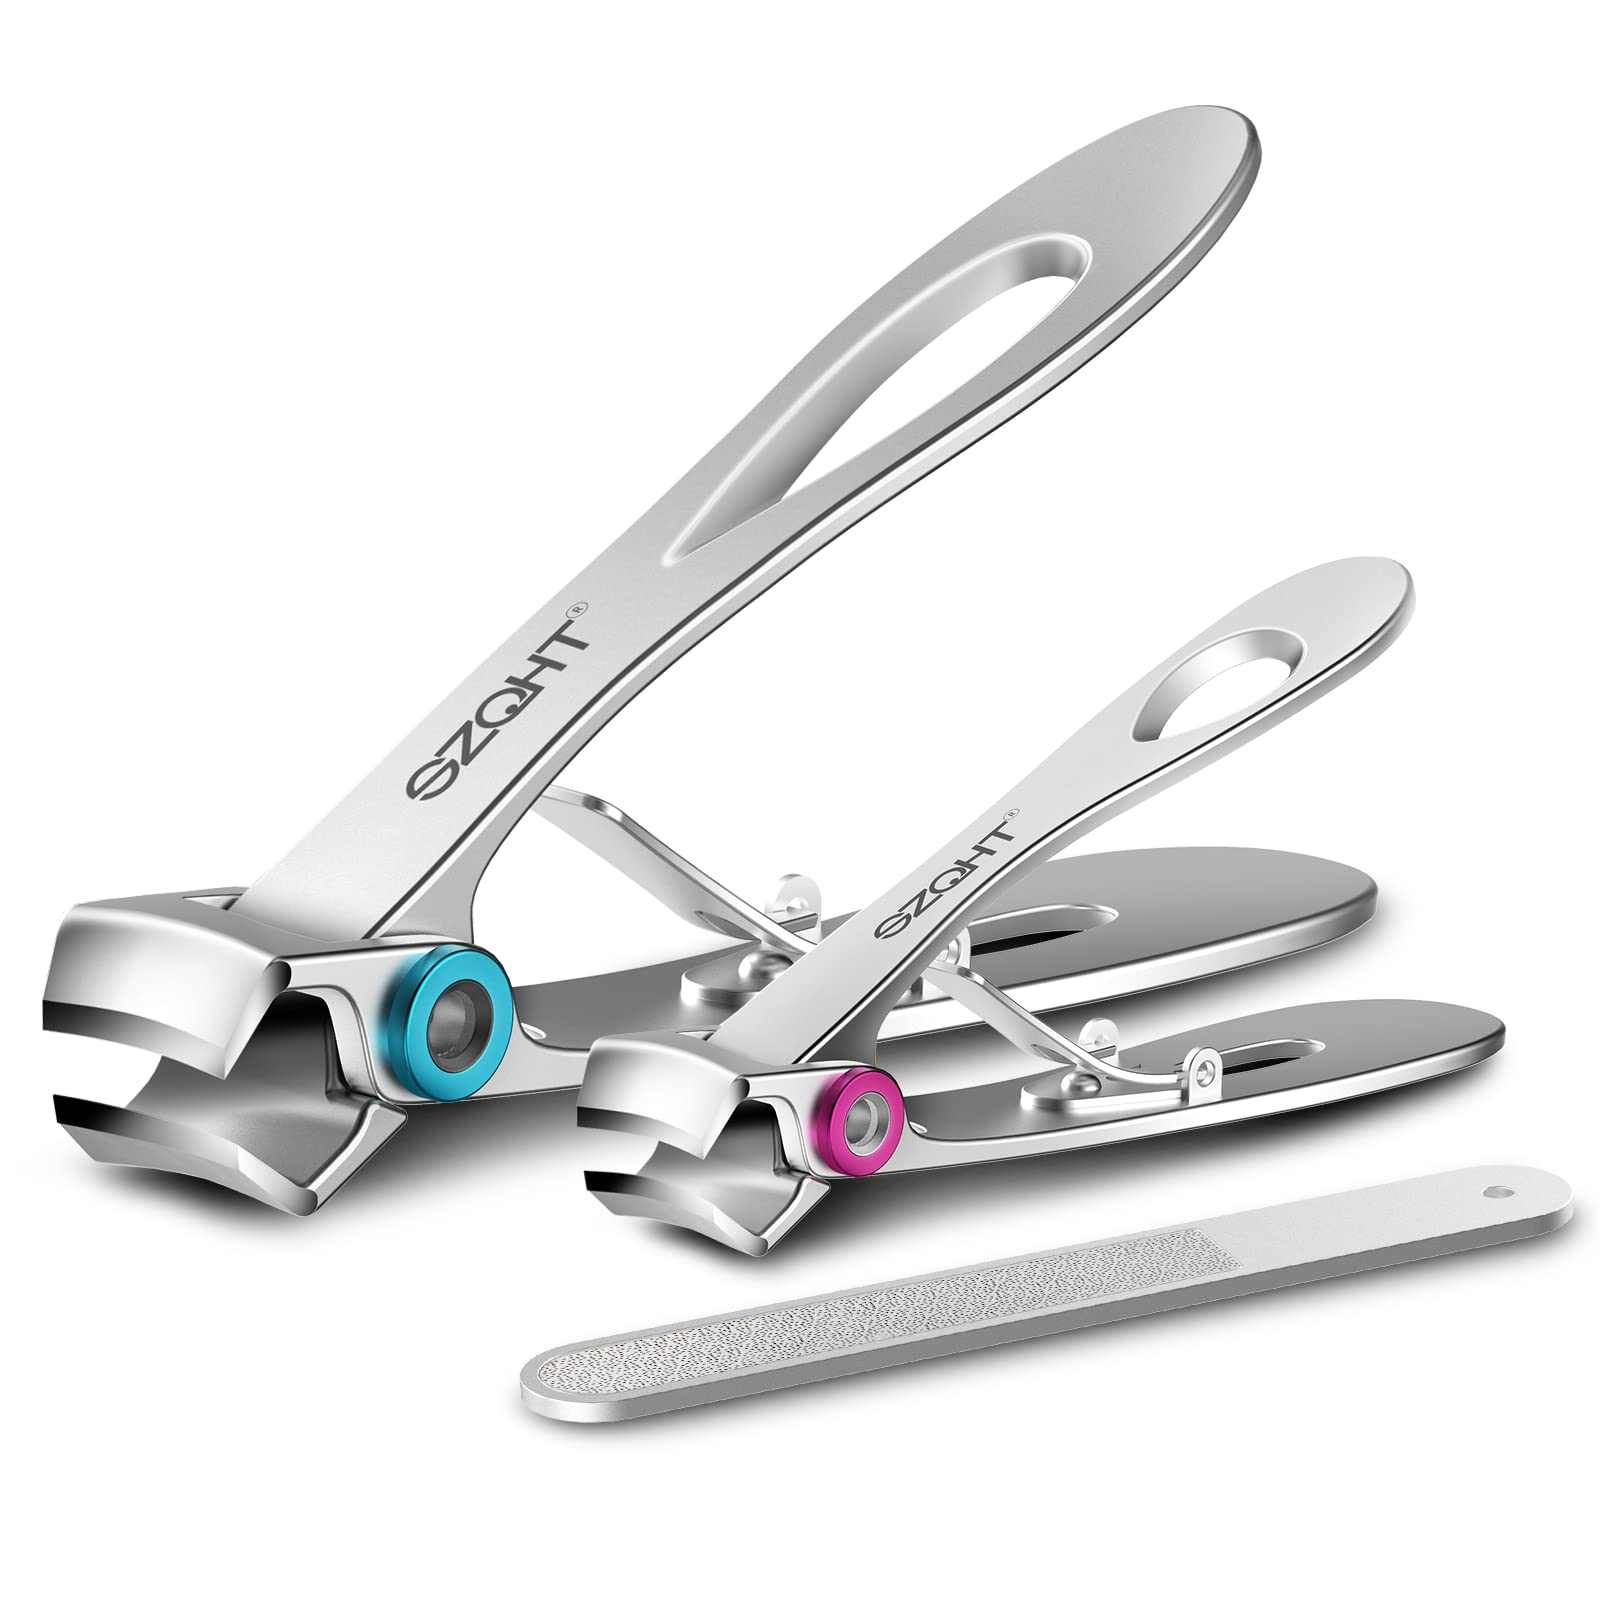 New Type Of Large Opening Nail Clipper With A 45-degree Angled